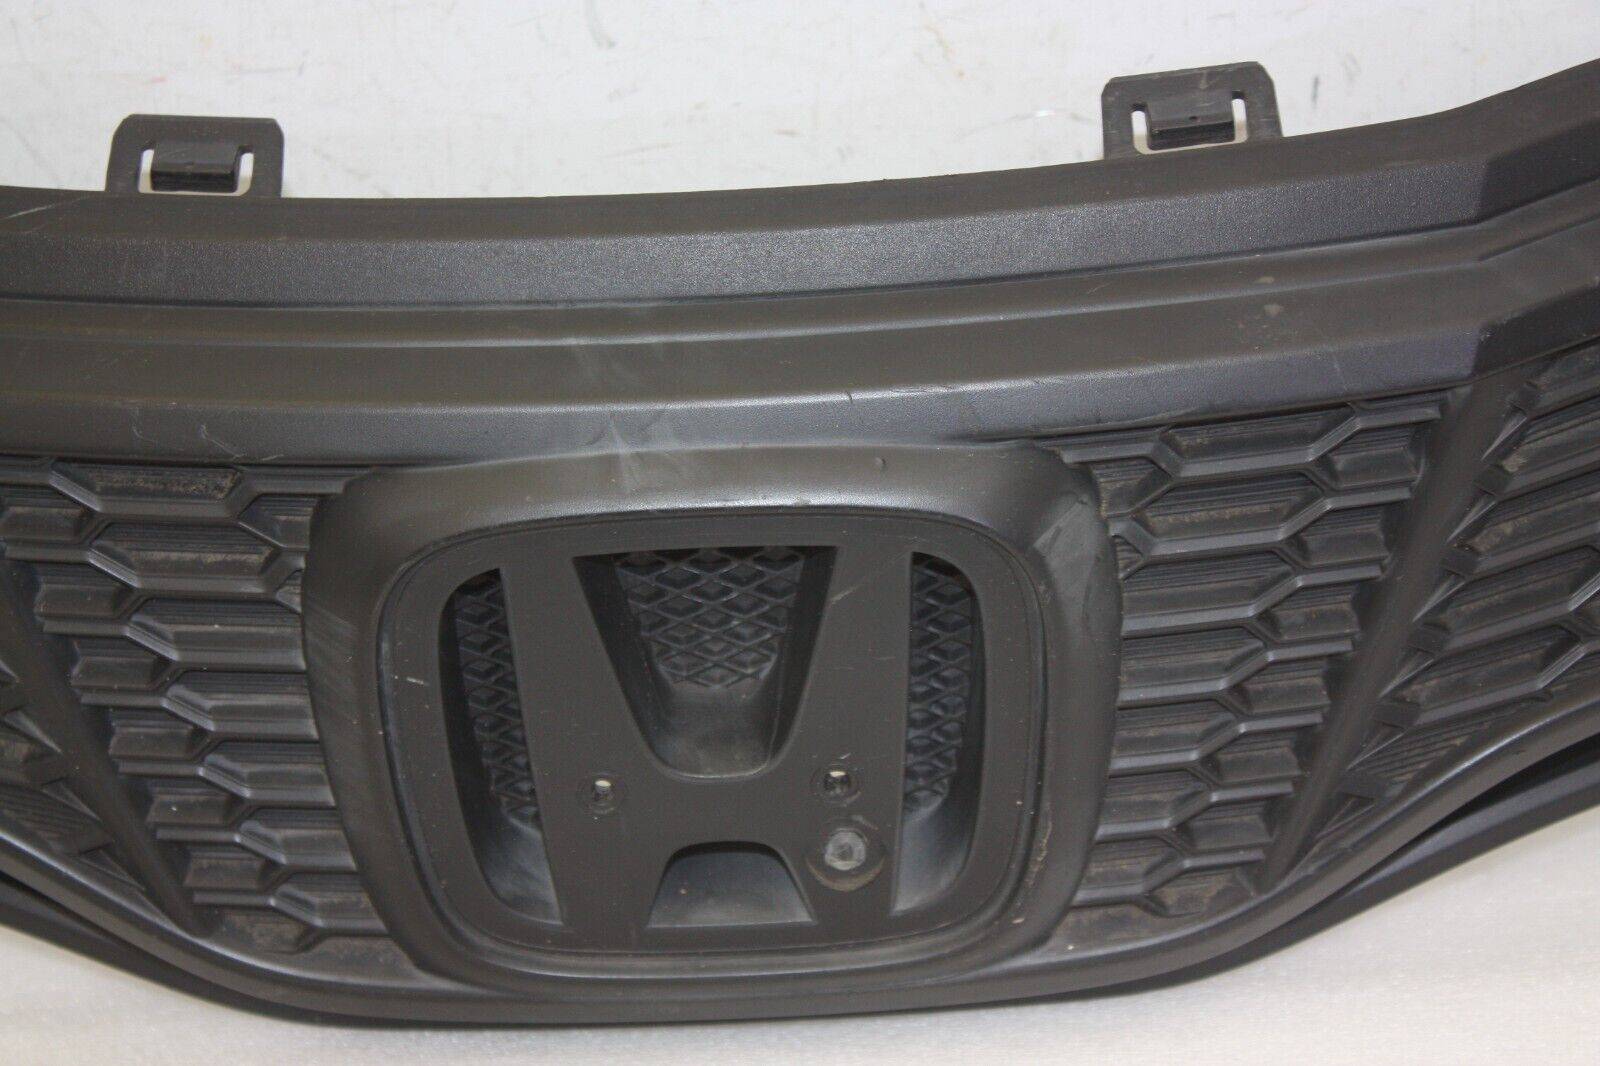 Honda-Jazz-Front-Bumper-Grill-2011-TO-2015-71121-TF0-90-Genuine-176301561996-8